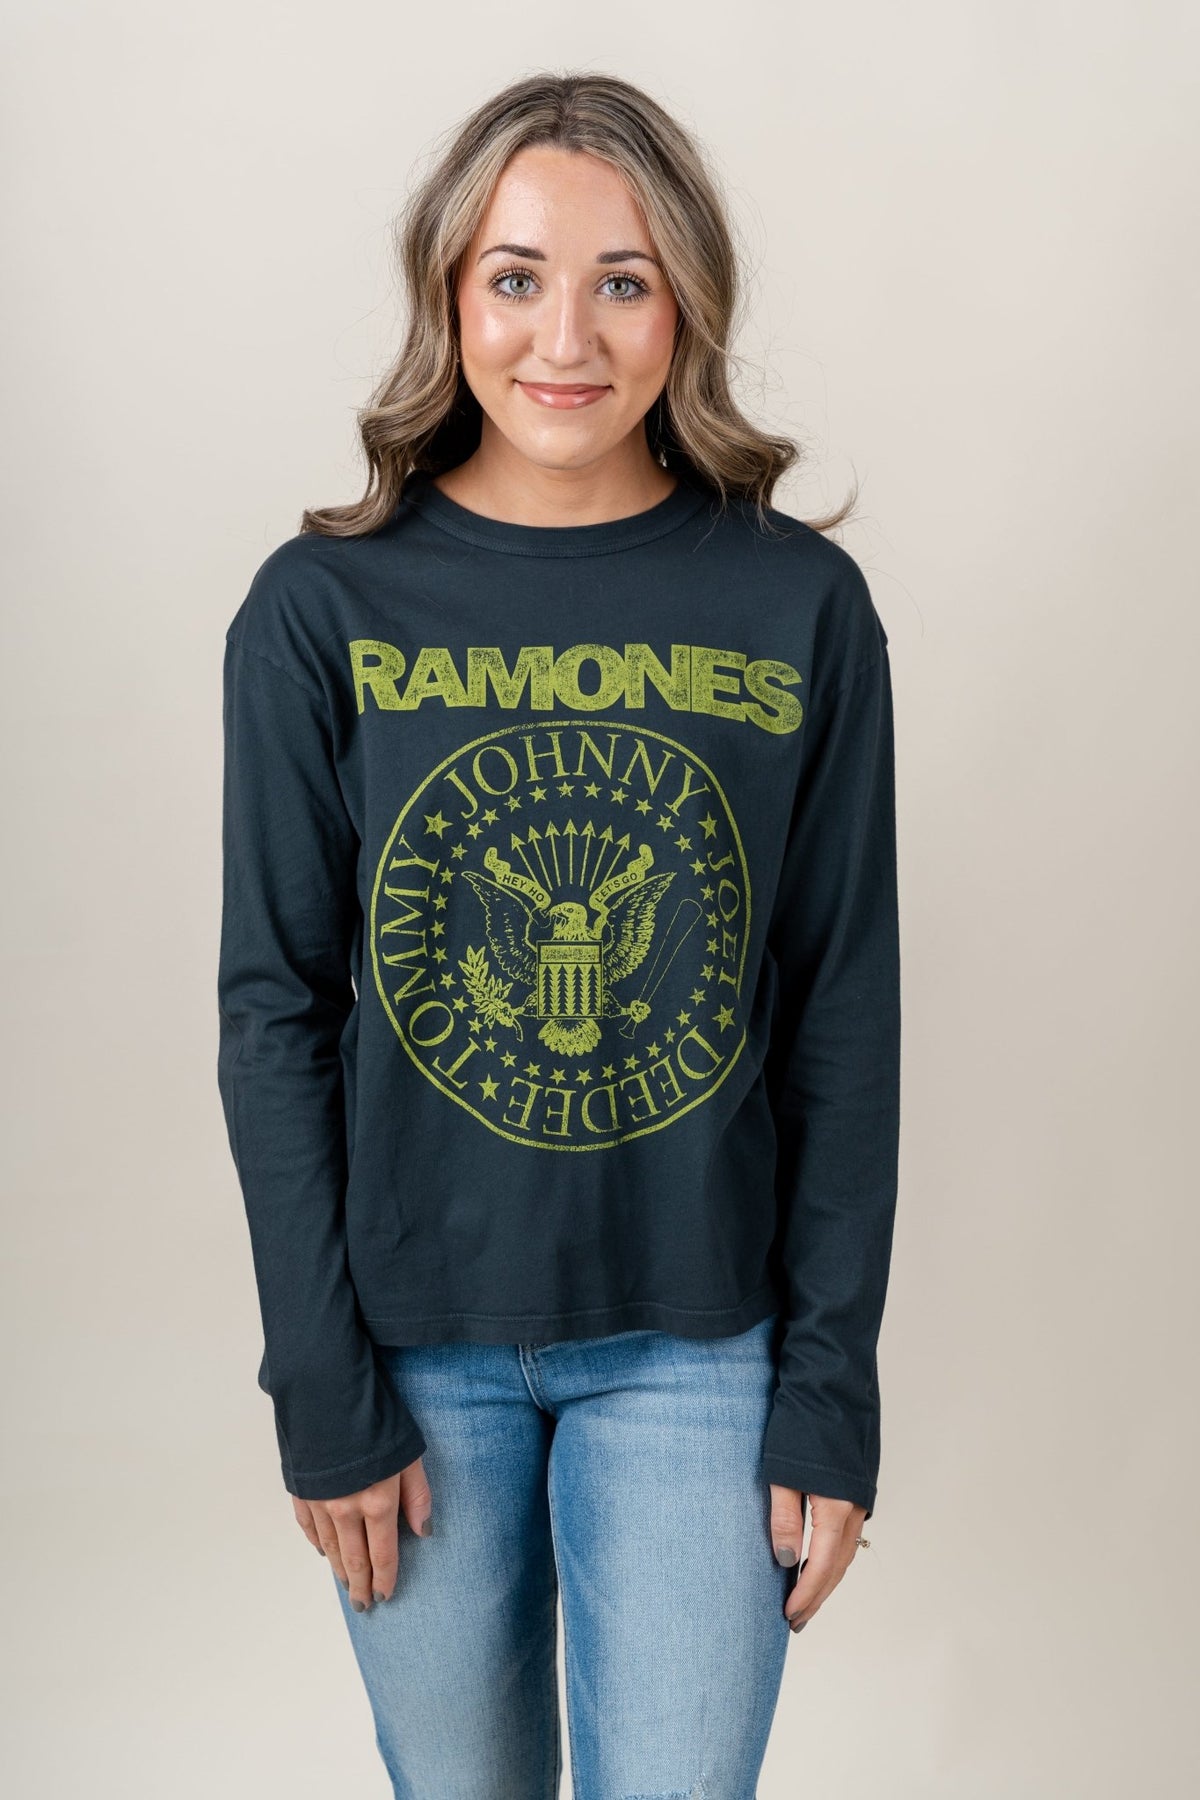 DayDreamer Ramones Crest long sleeve t-shirt vintage black - DayDreamer Graphic Band Tees at Lush Fashion Lounge Trendy Boutique in Oklahoma City